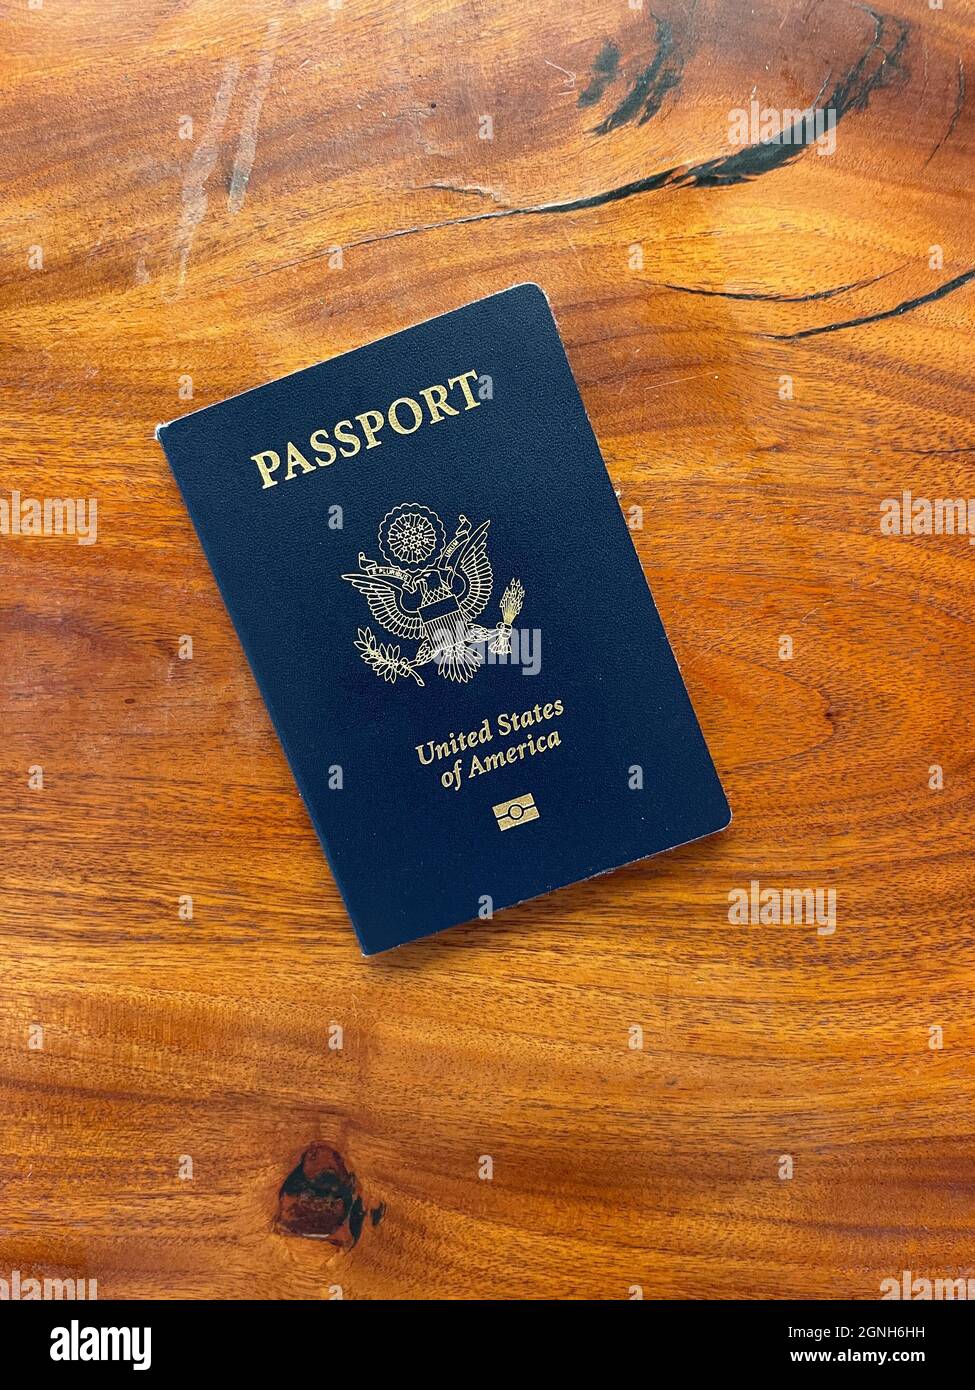 A United States of America Passport on wooden surface Stock Photo